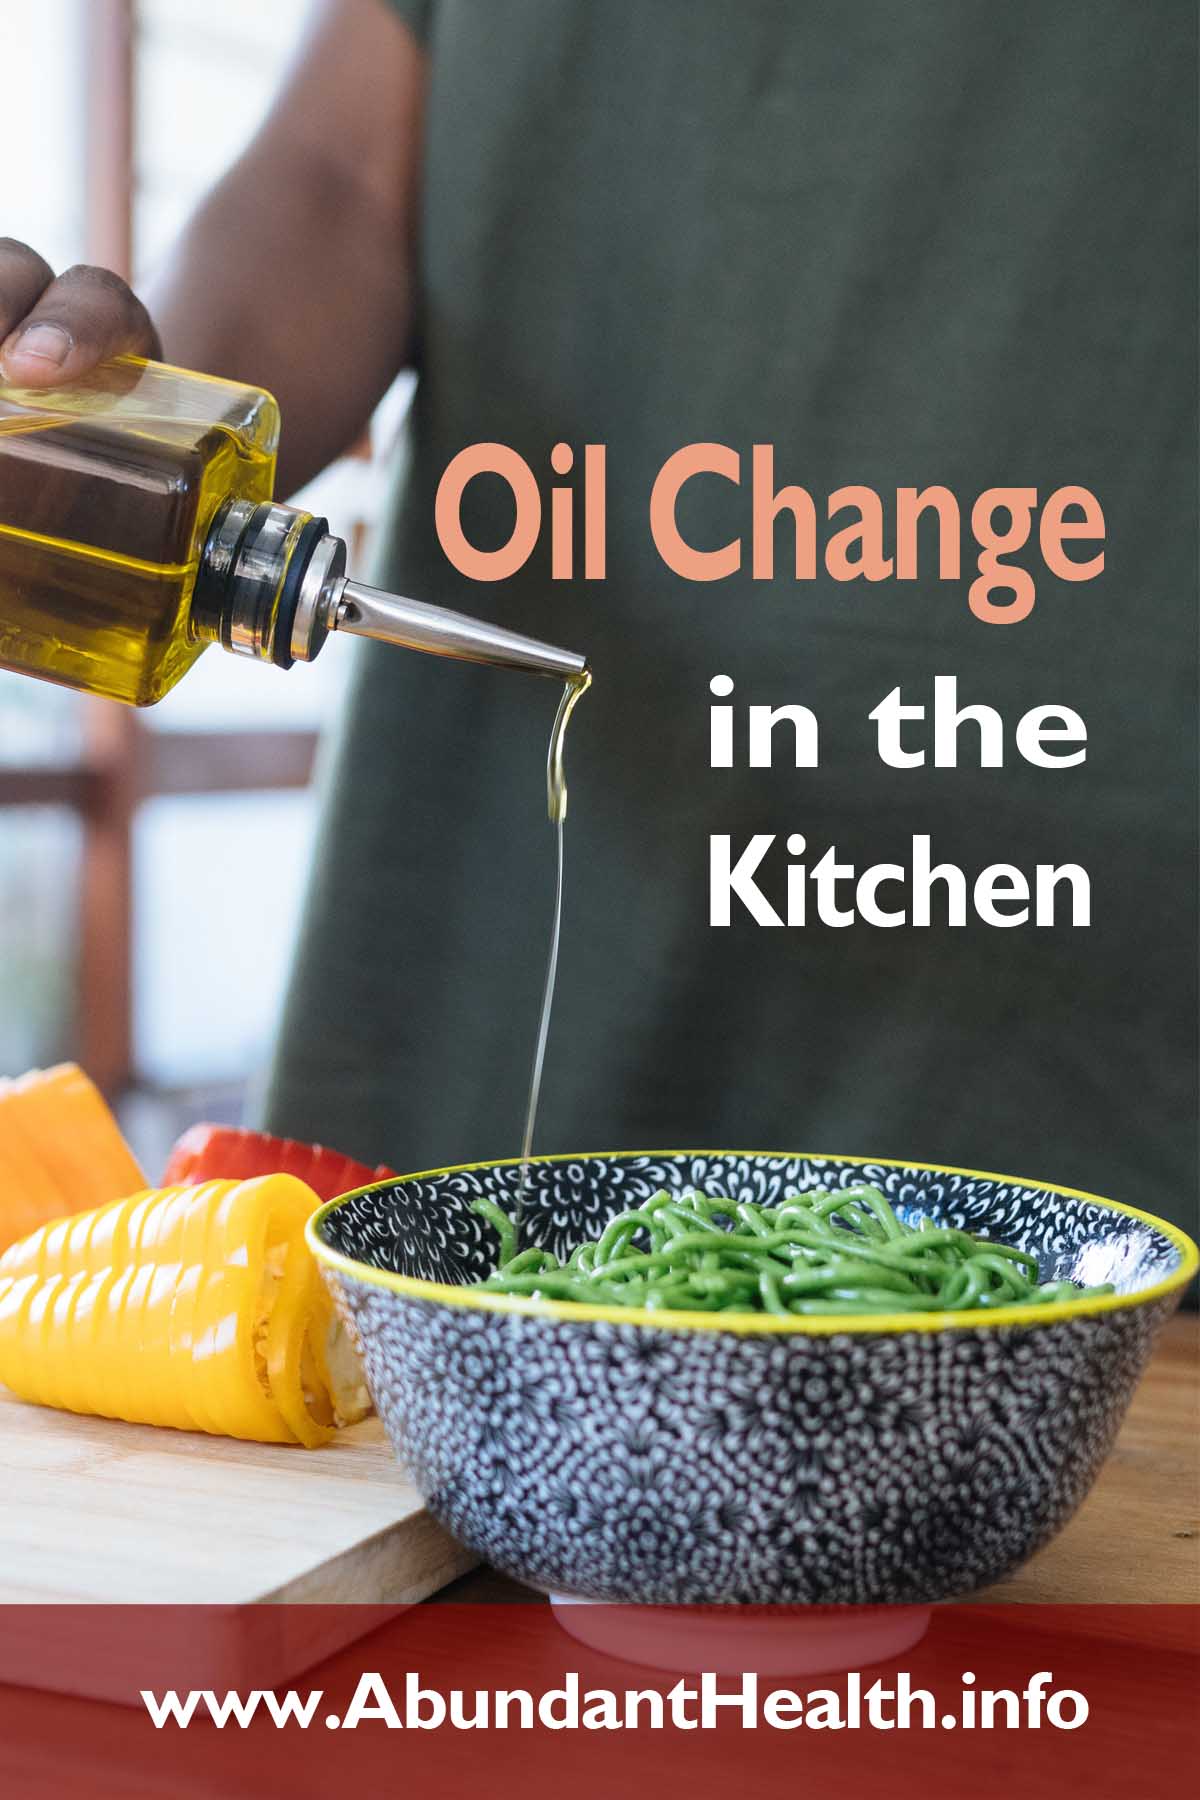 Oil Change in the Kitchen